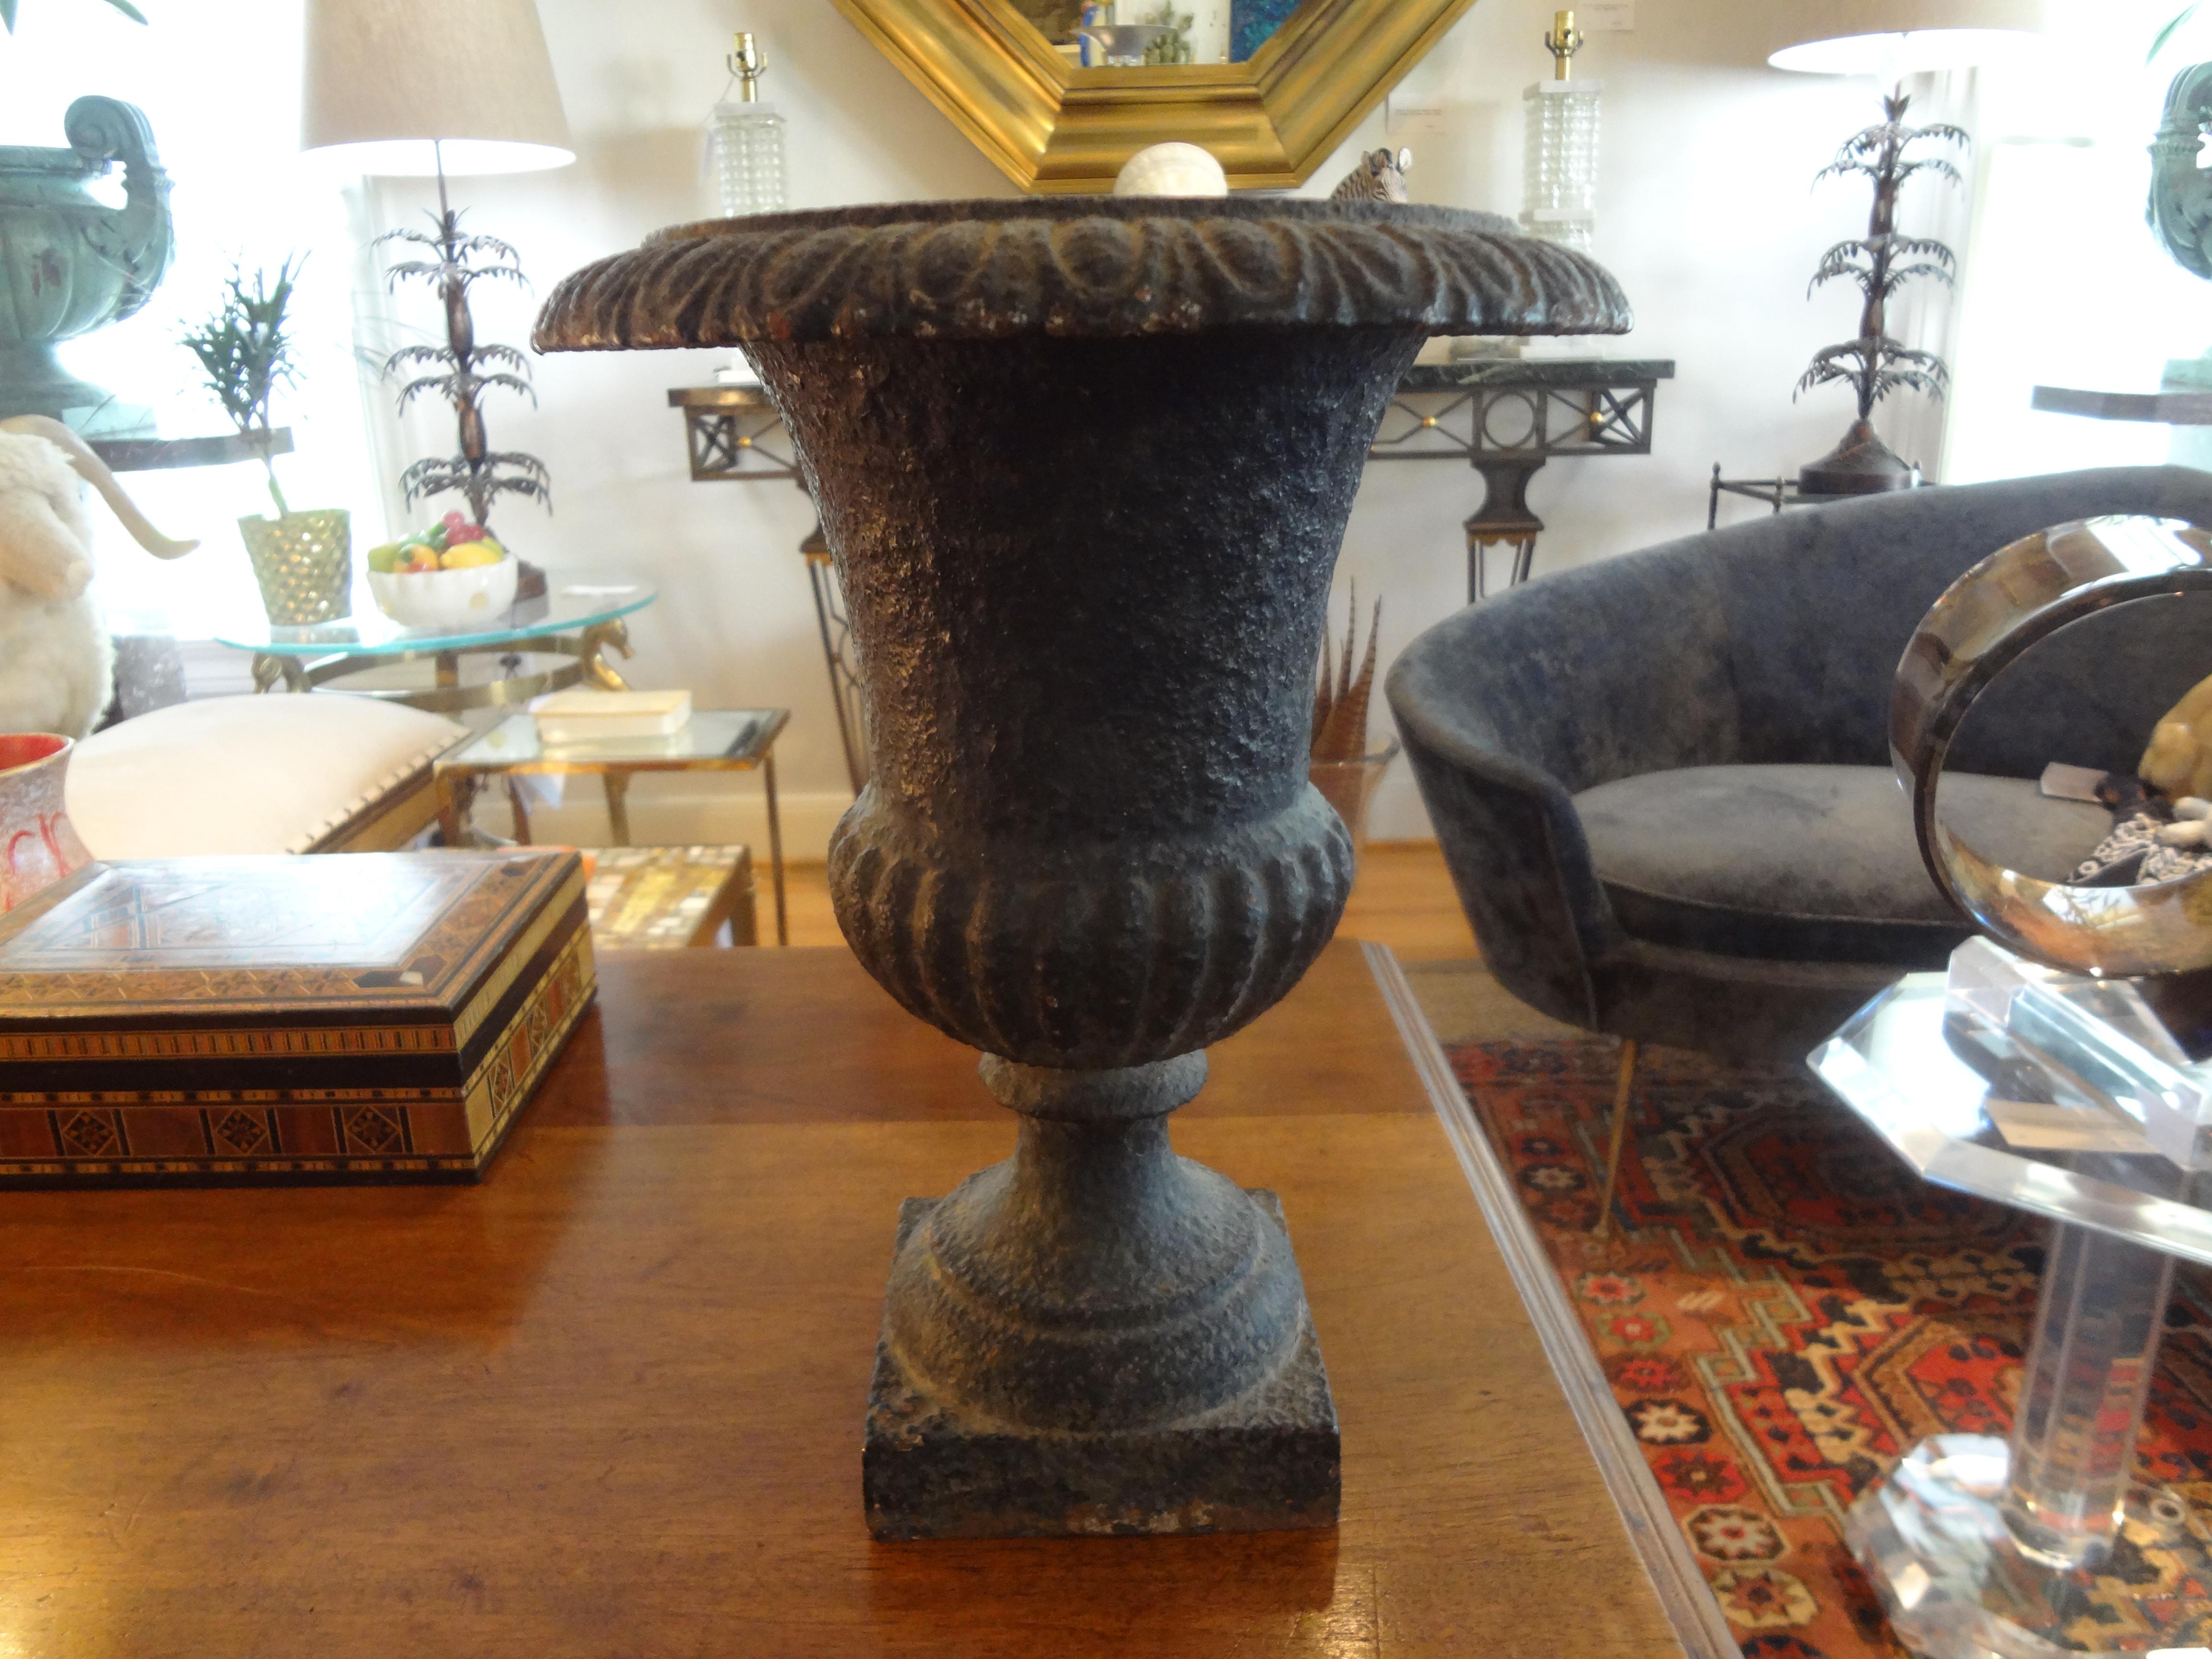 Great pair of 19th century French cast iron Campana urns/garden urns. This pair of Classical Roman antique urns, planters or jardinières are perfect for indoor or outdoor use.